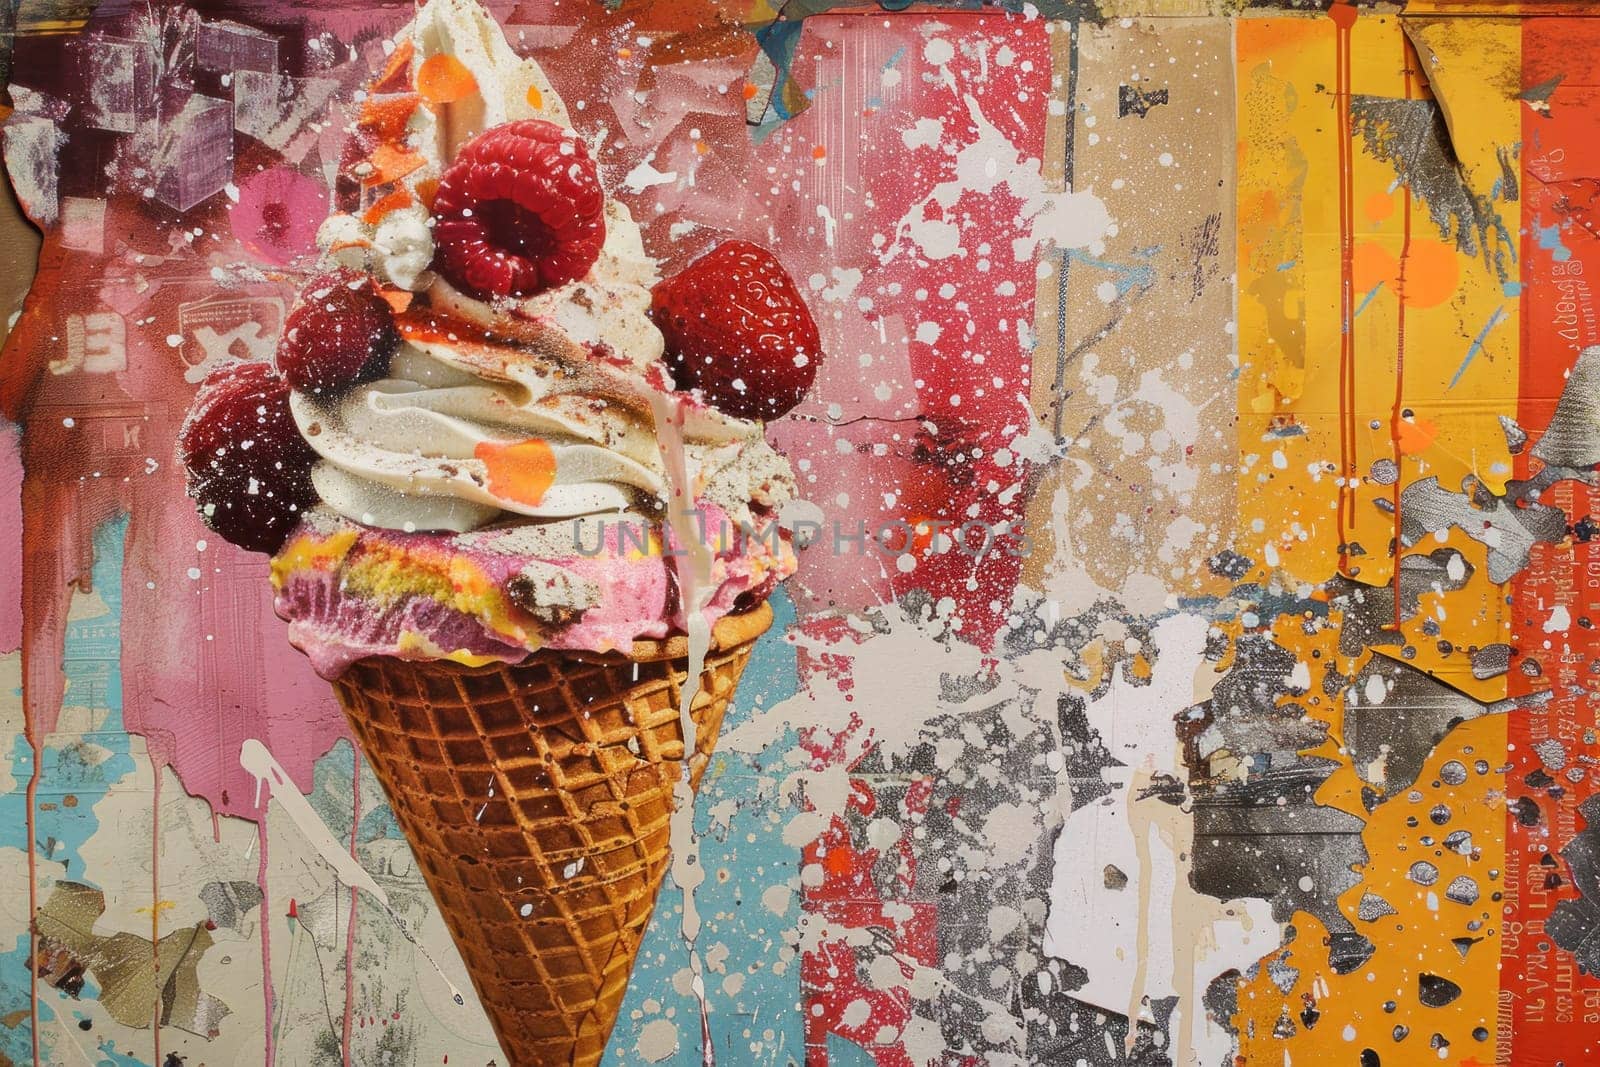 Delicious ice cream cone with raspberries against colorful wall as symbol of summer joy